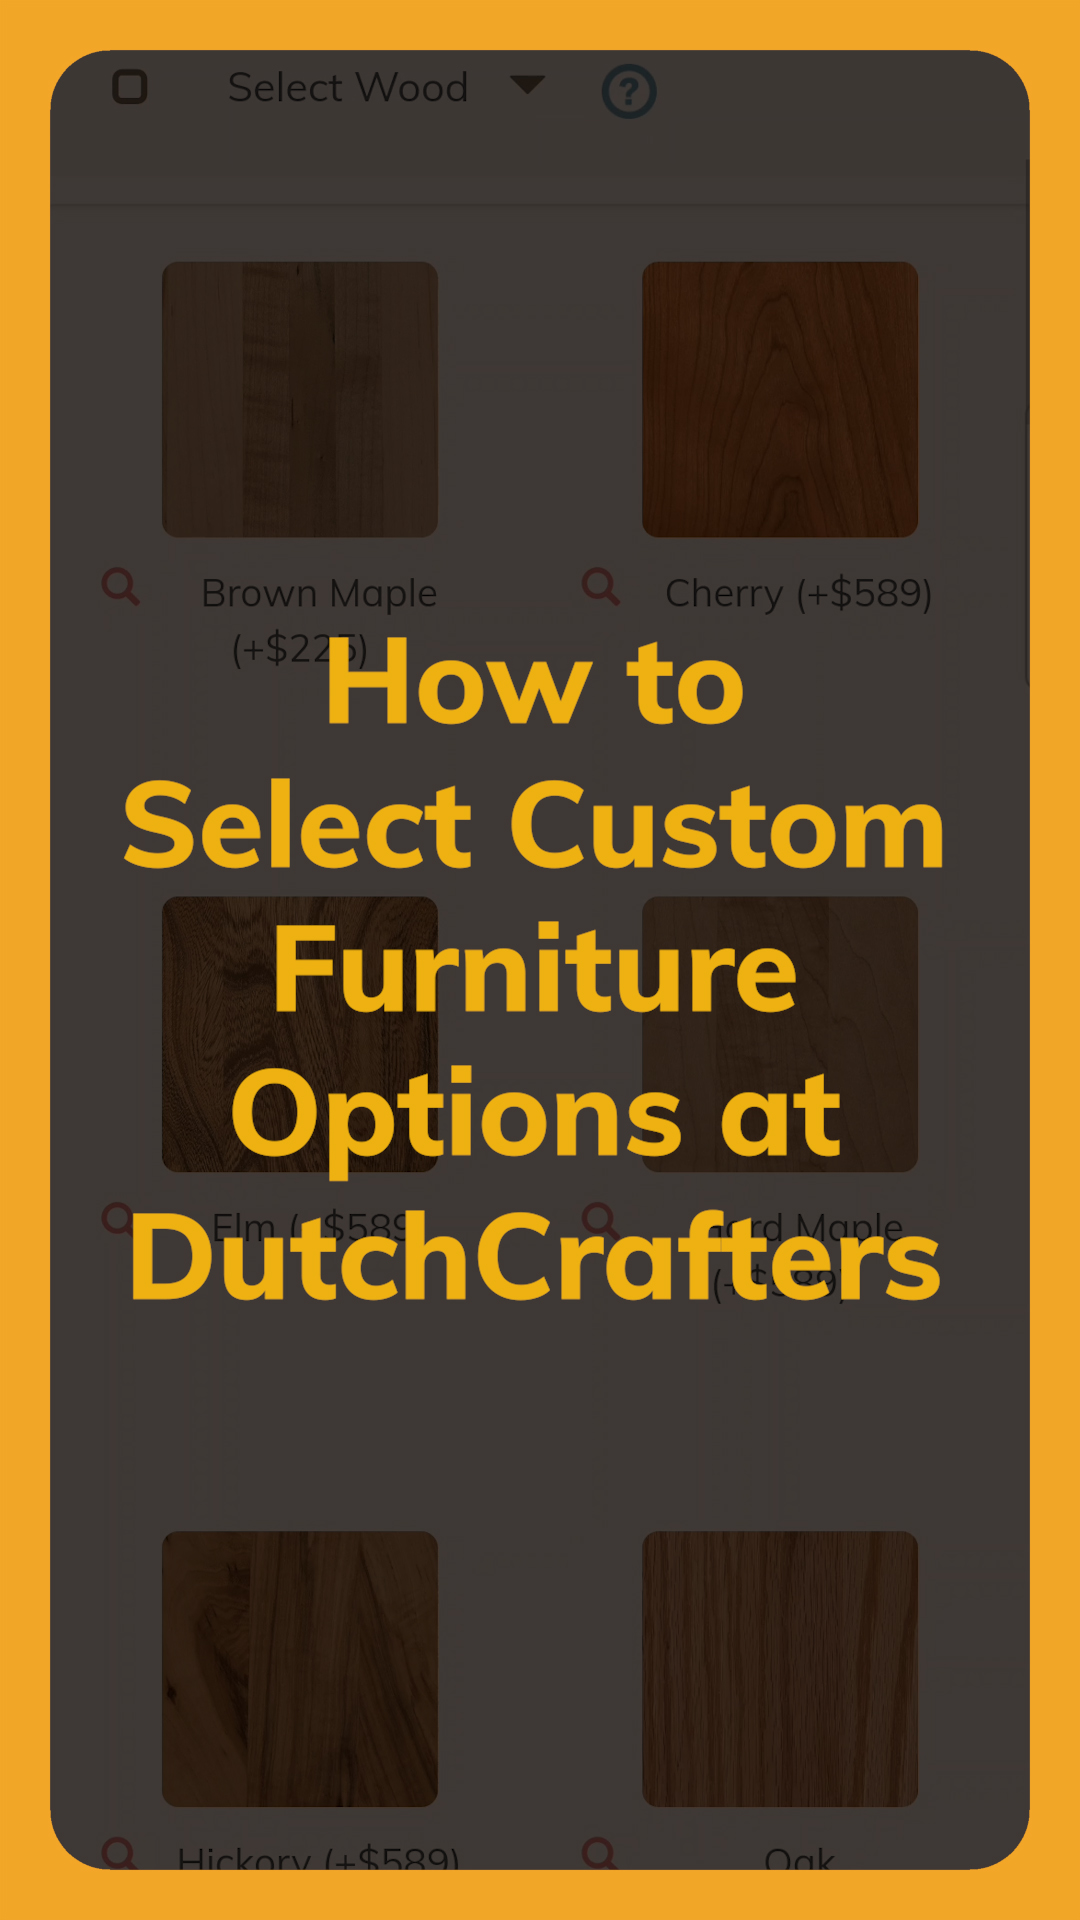 Video title reading, "How to Select Custom Furniture Options at DutchCrafters"